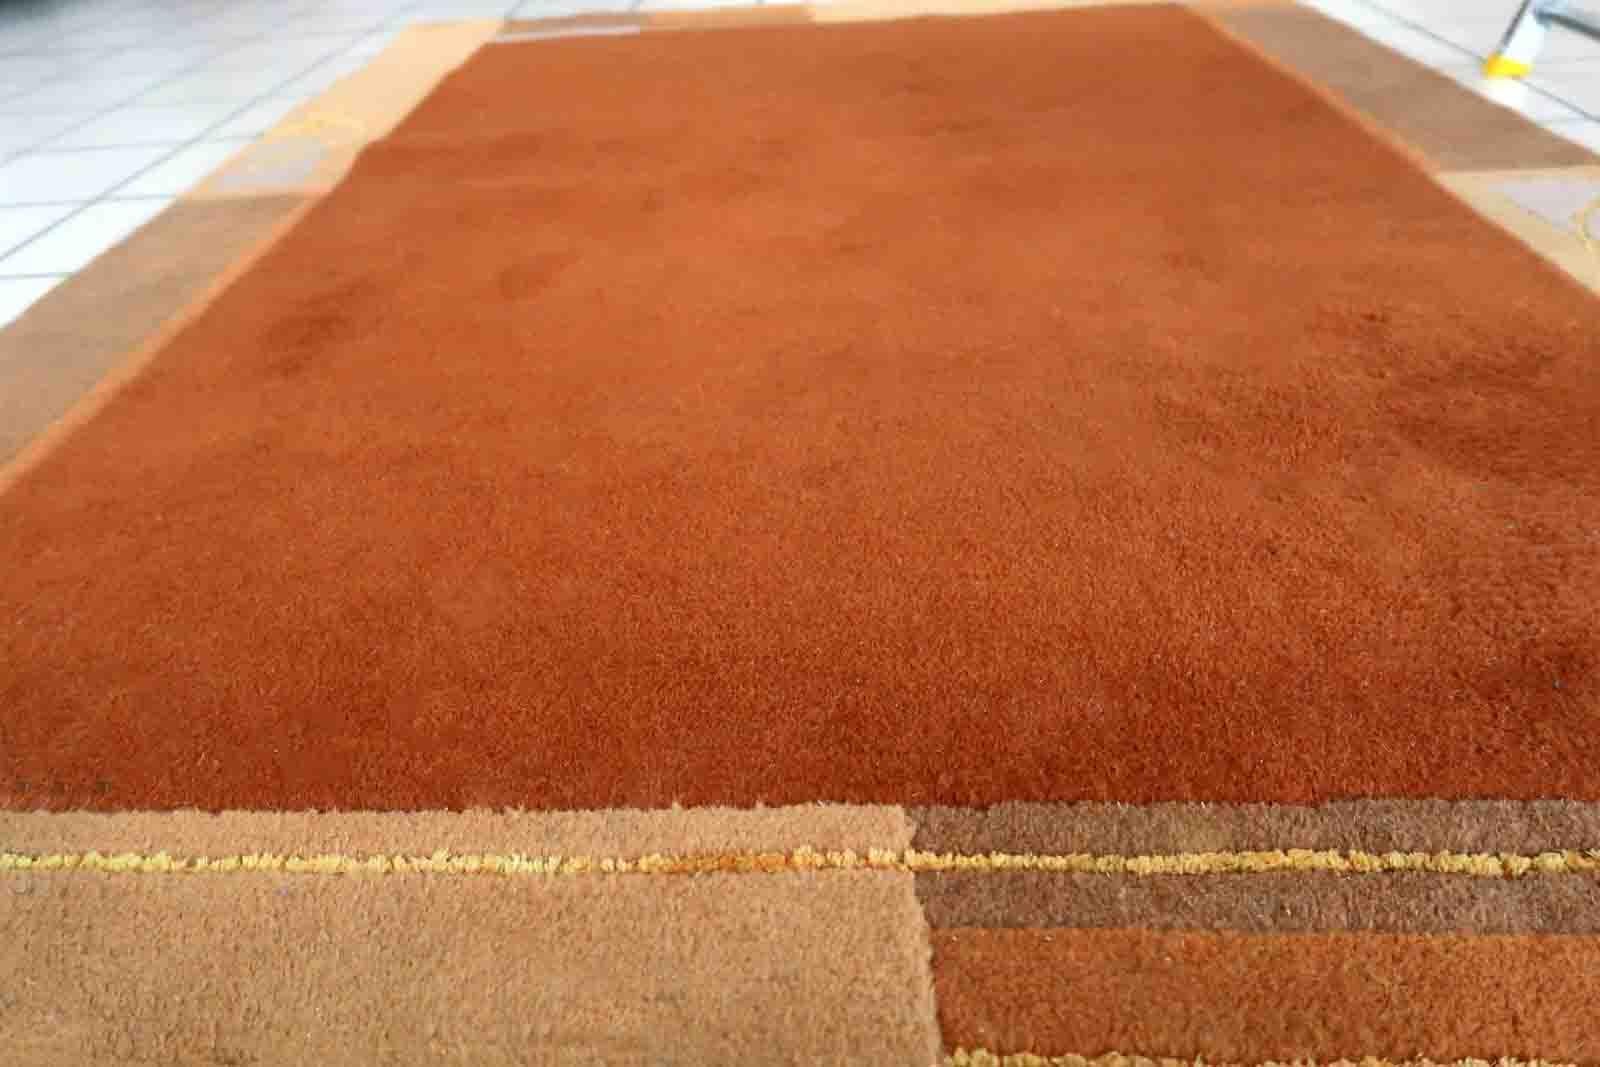 Handmade vintage Tibetan Khaden rug in different shades of brown and beige colors. The rug is from the end of 20th century, it is in original good condition. 

-condition: original good,

-circa: 1970s,

-size: 4' x 5.3' (122cm x